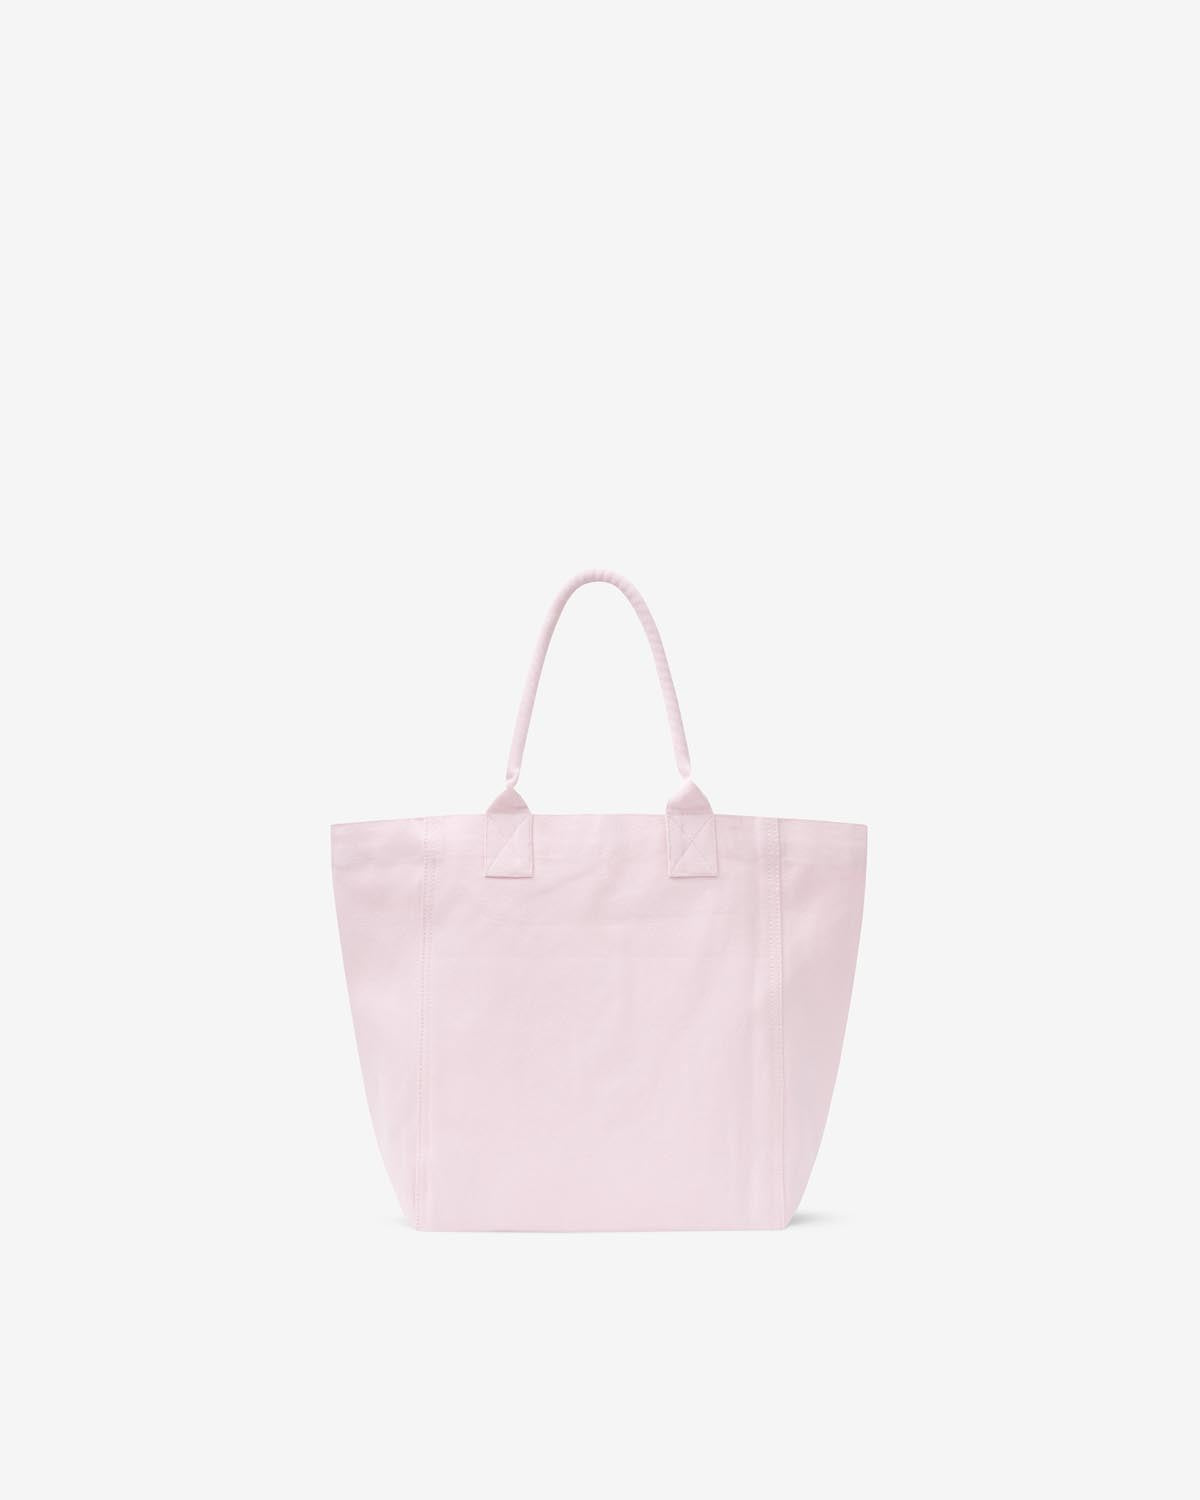 Tote bag yenky small Woman Rosa 2